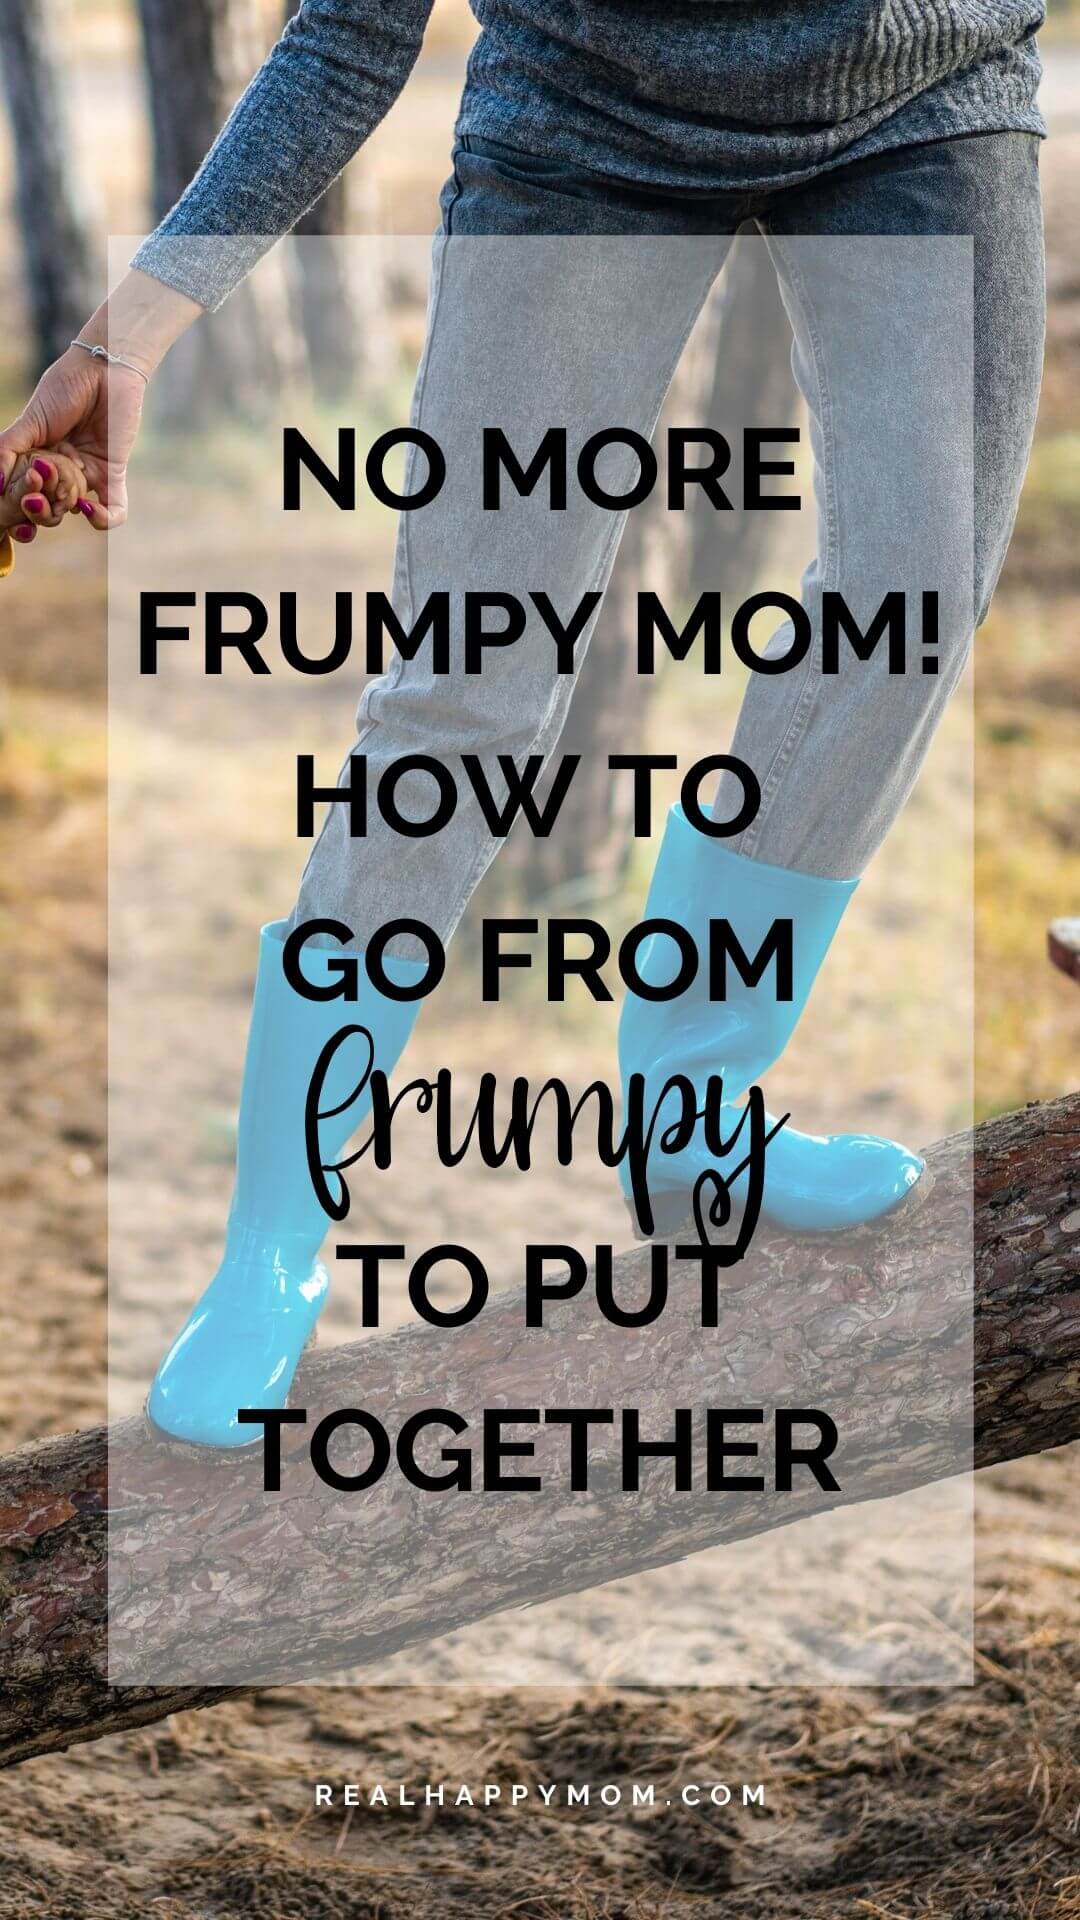 No More Frumpy Mom! How to Go From Frumpy to Put Together